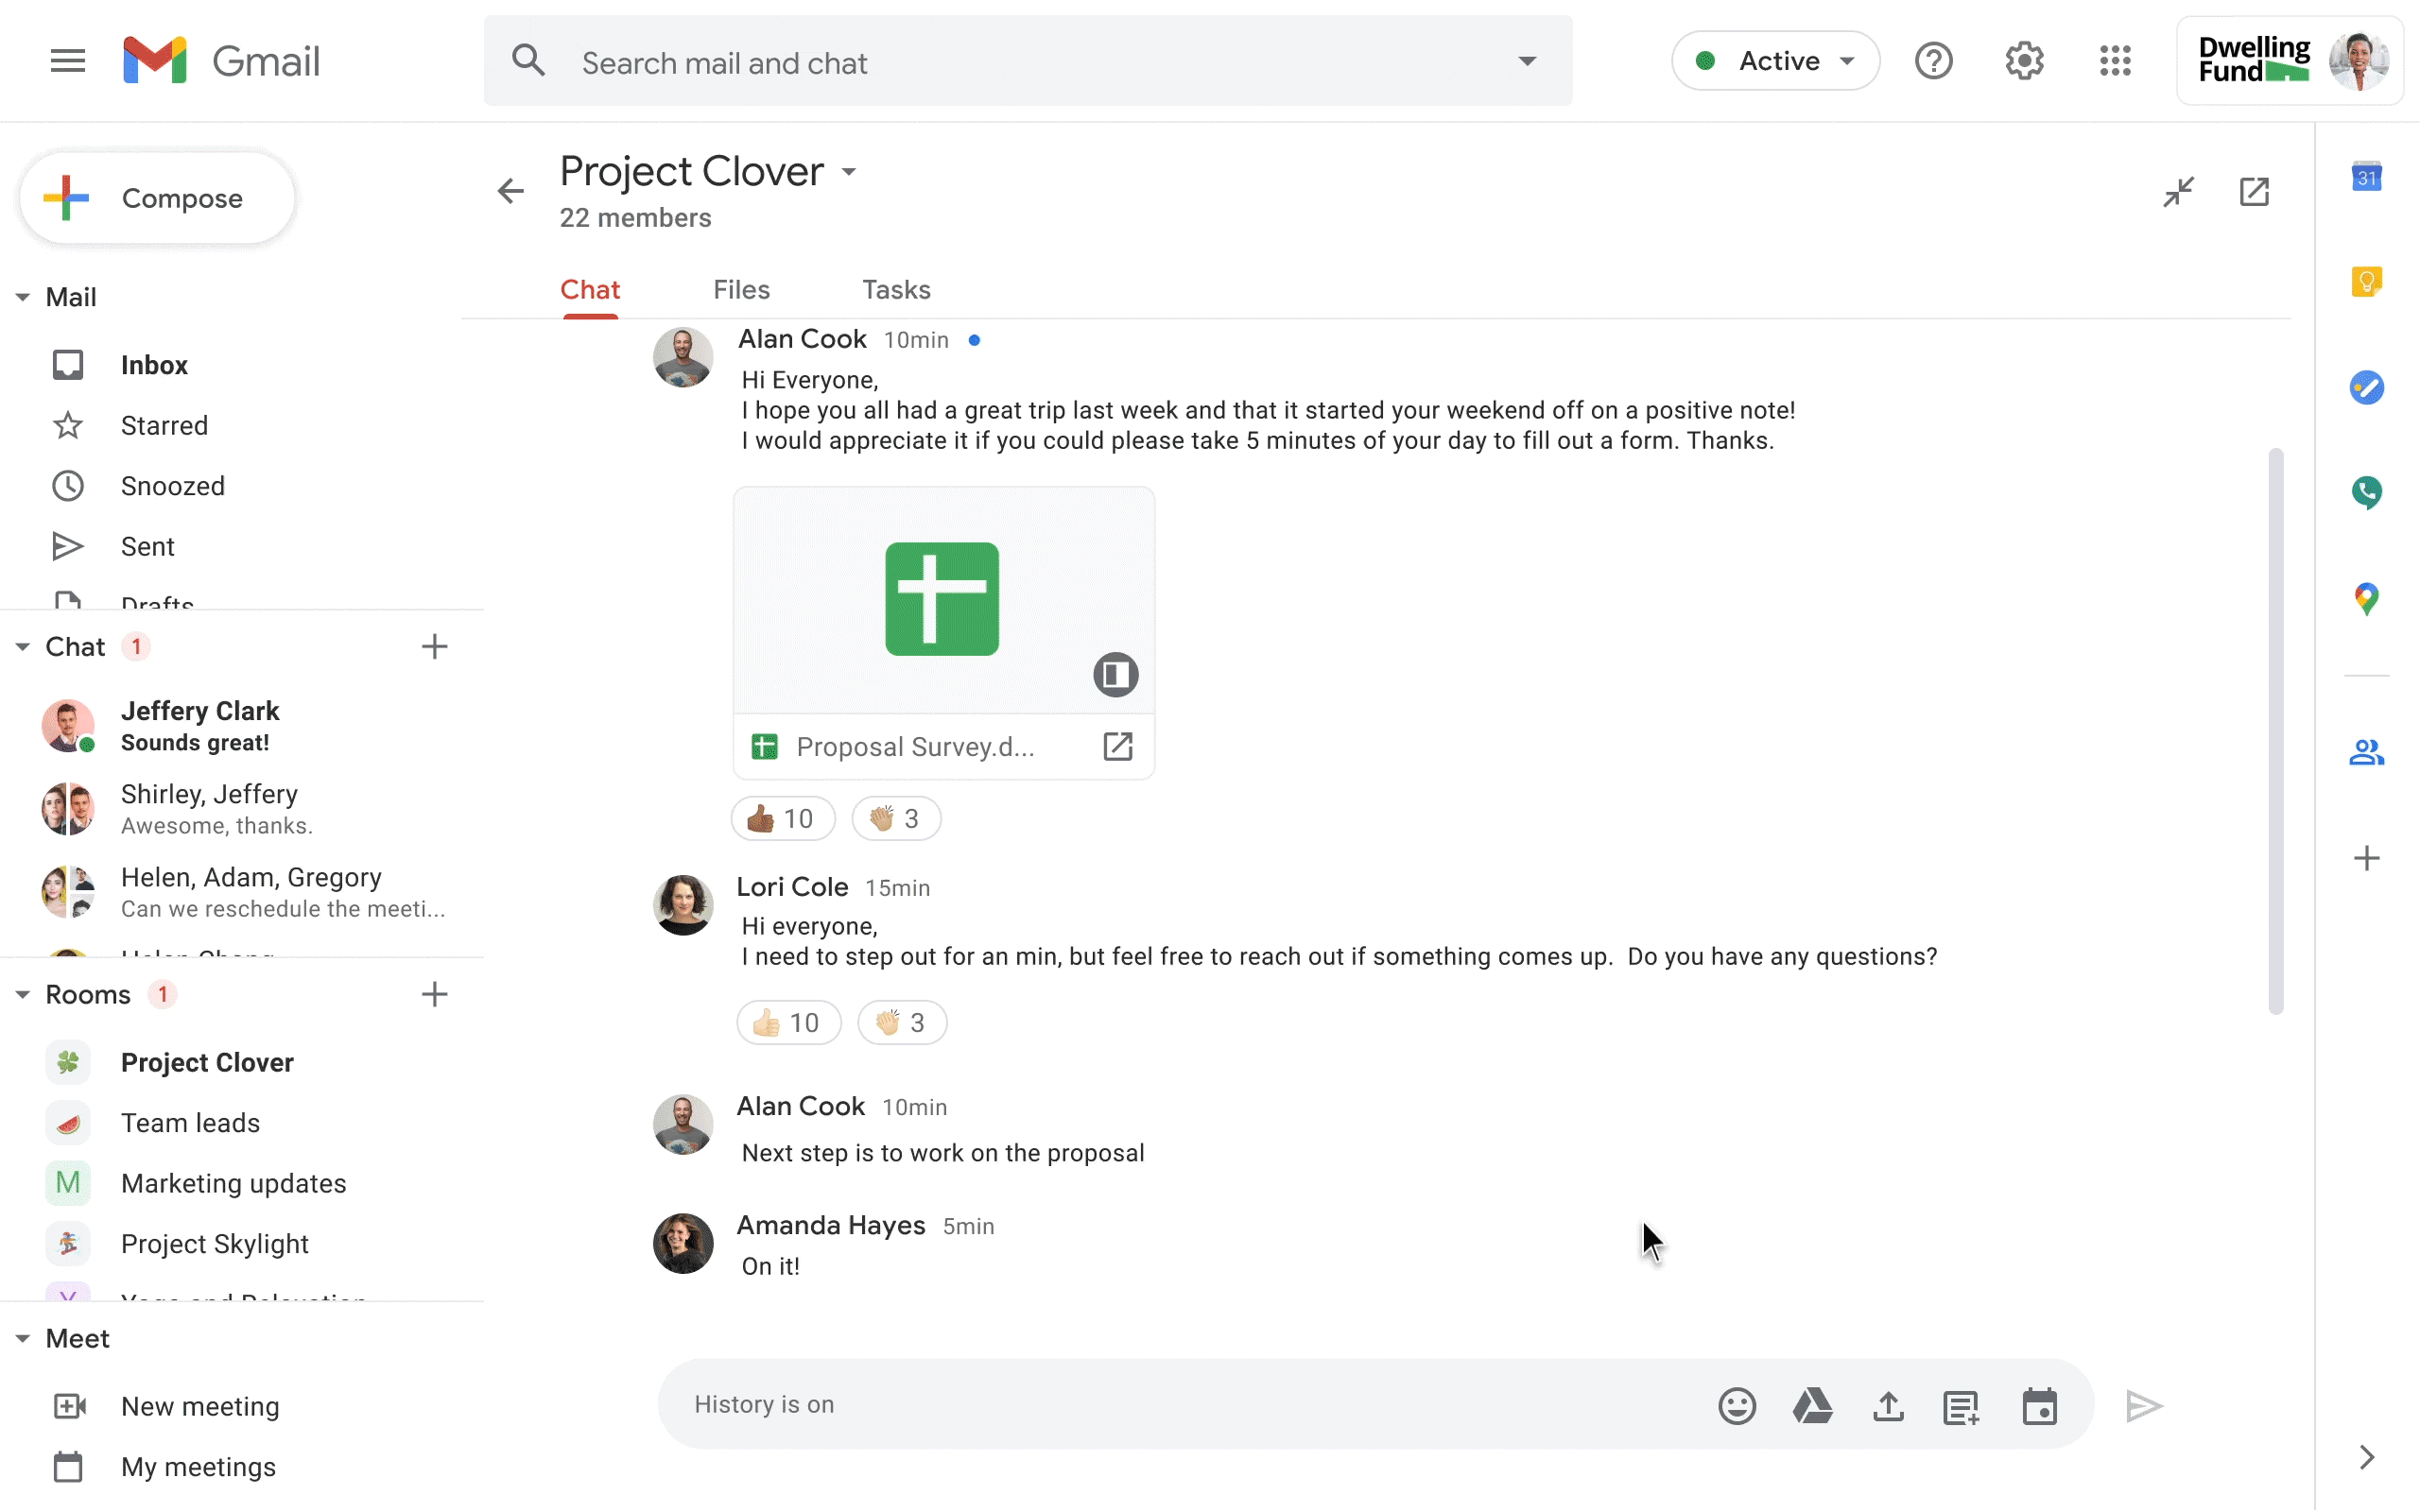 Google Workplace's new interface